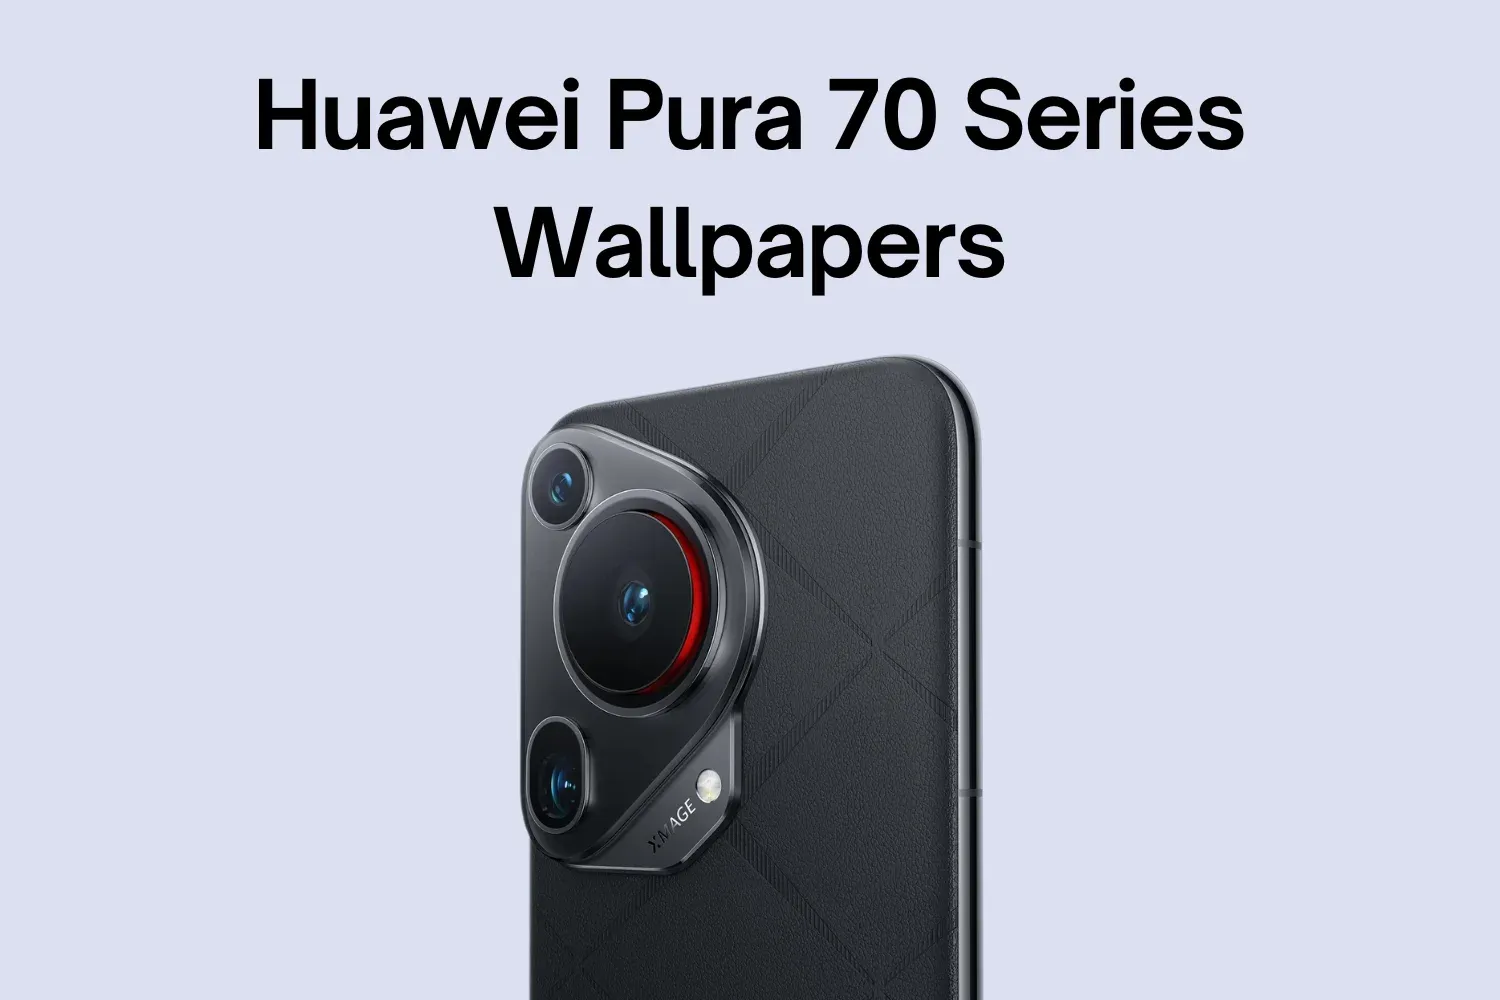 Grab these new Huawei Pura 70 series Wallpapers in FHD+